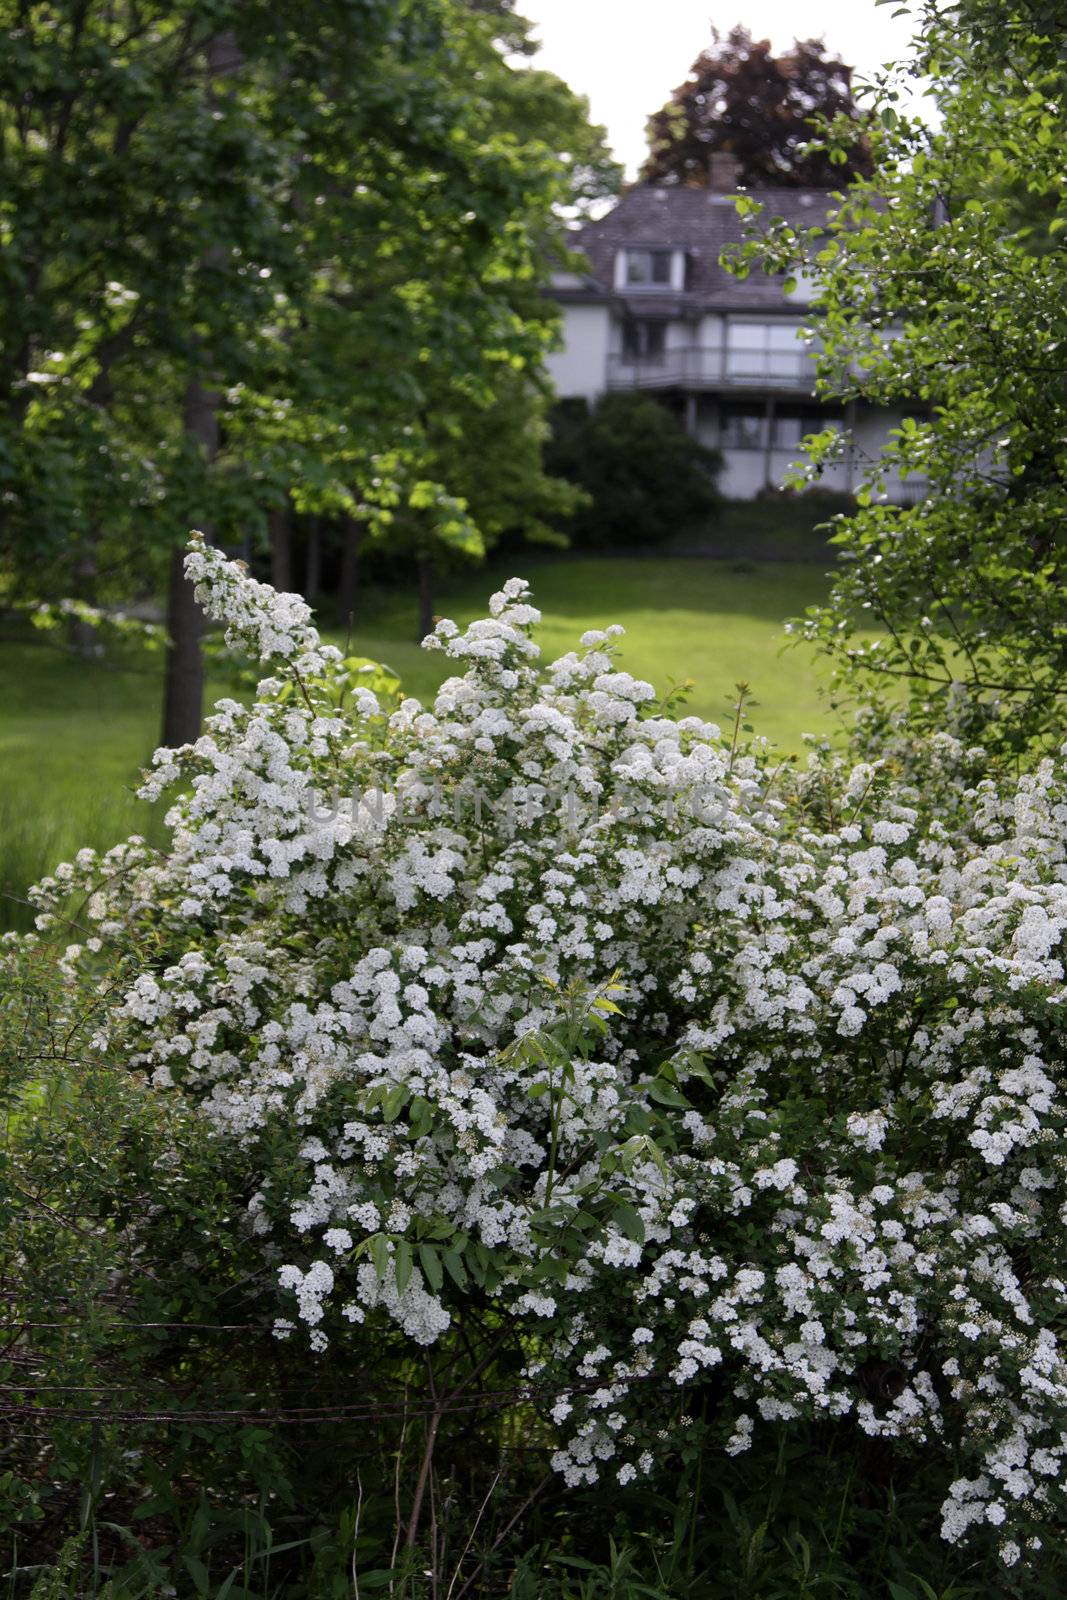 A bush with white flowers shot in the backyard of a luxury home at dusk.
